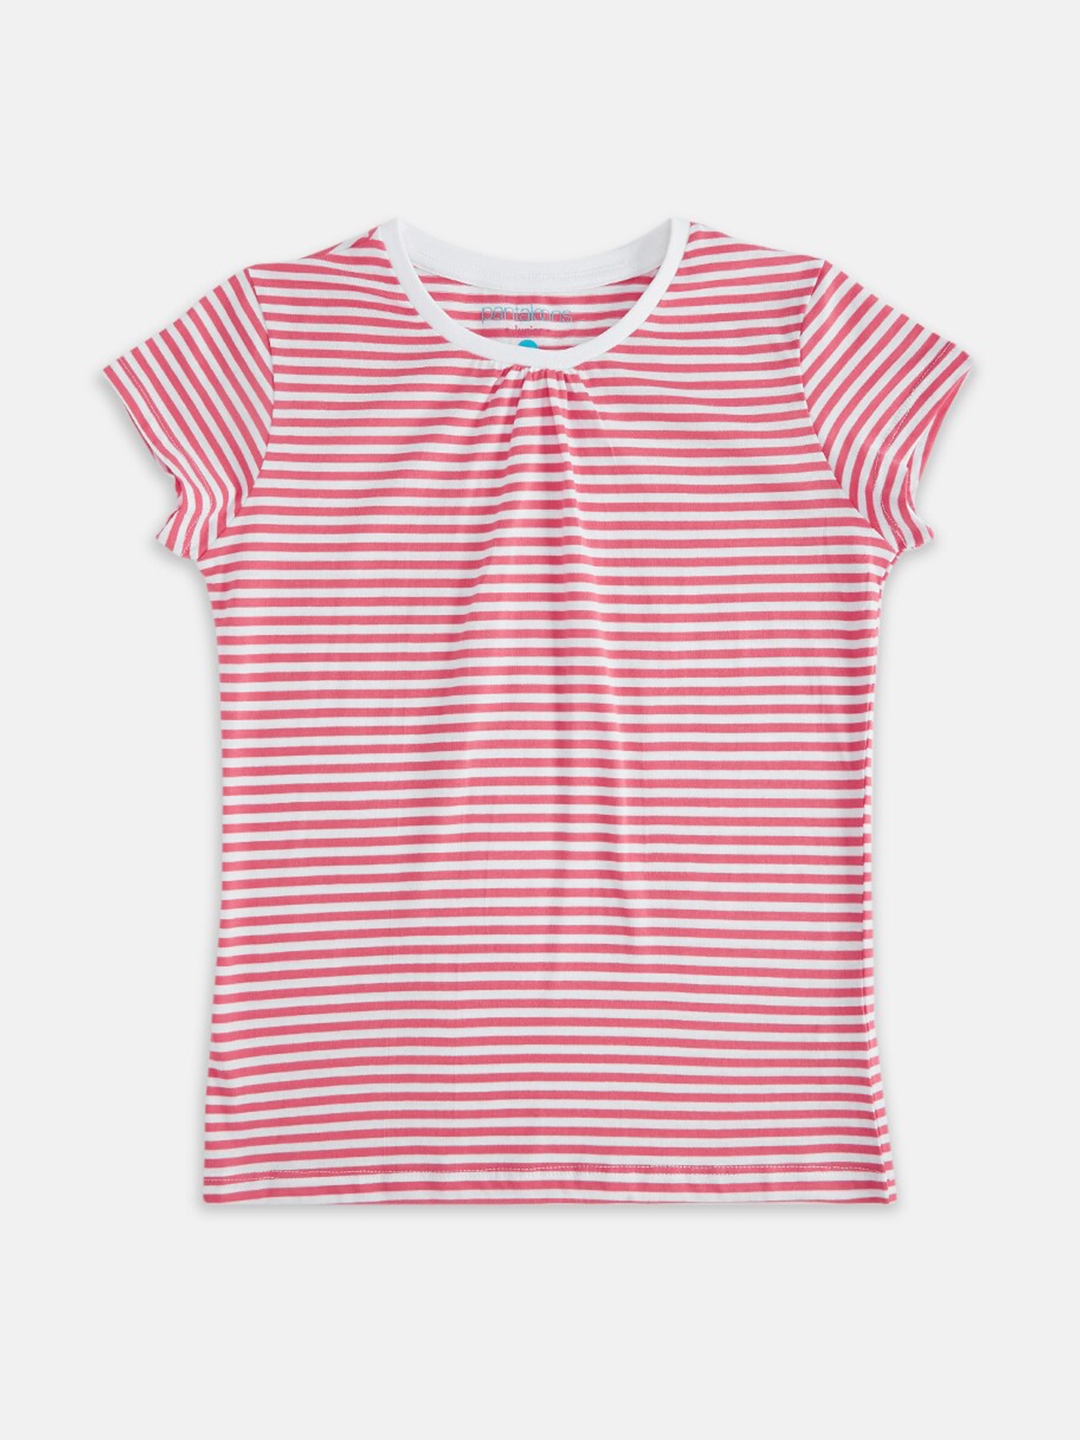 Buy Pantaloons Junior Girls Pink & White Striped Extended Sleeves T ...